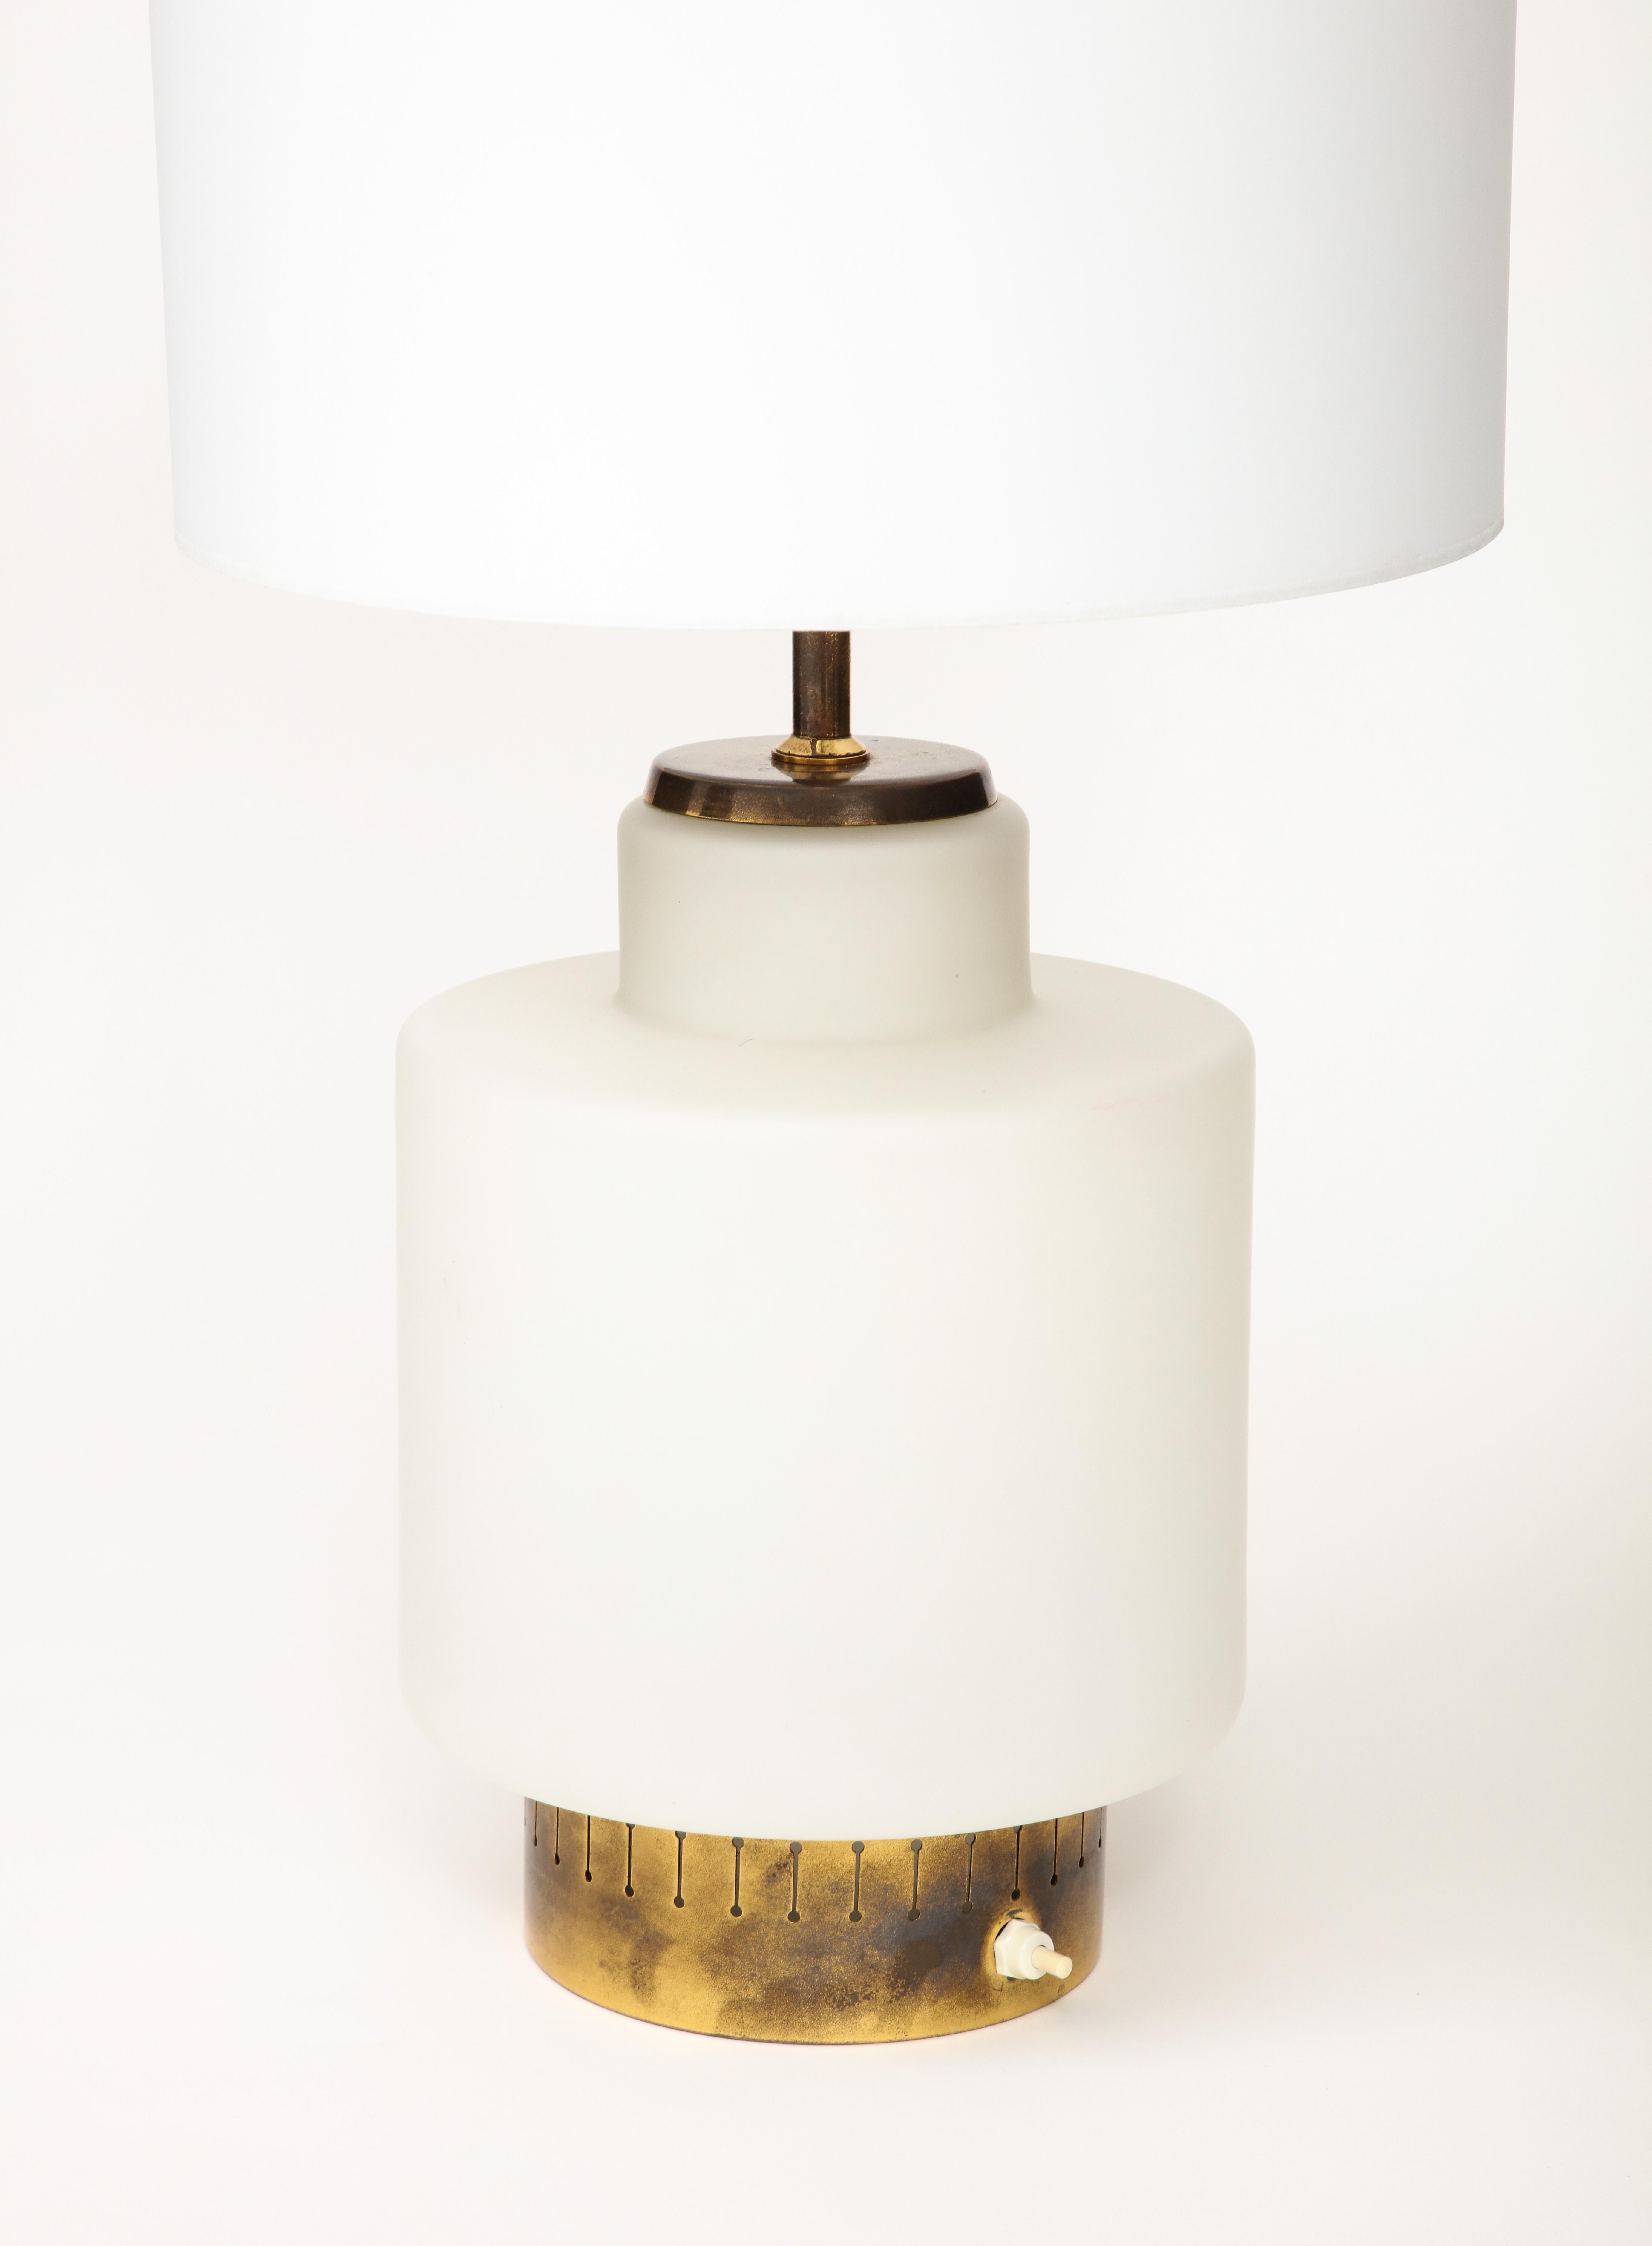 Stilnovo Opaline & Brass Lamp, mod. 8055, Parchment Shade, Italy, c. 1950's For Sale 7